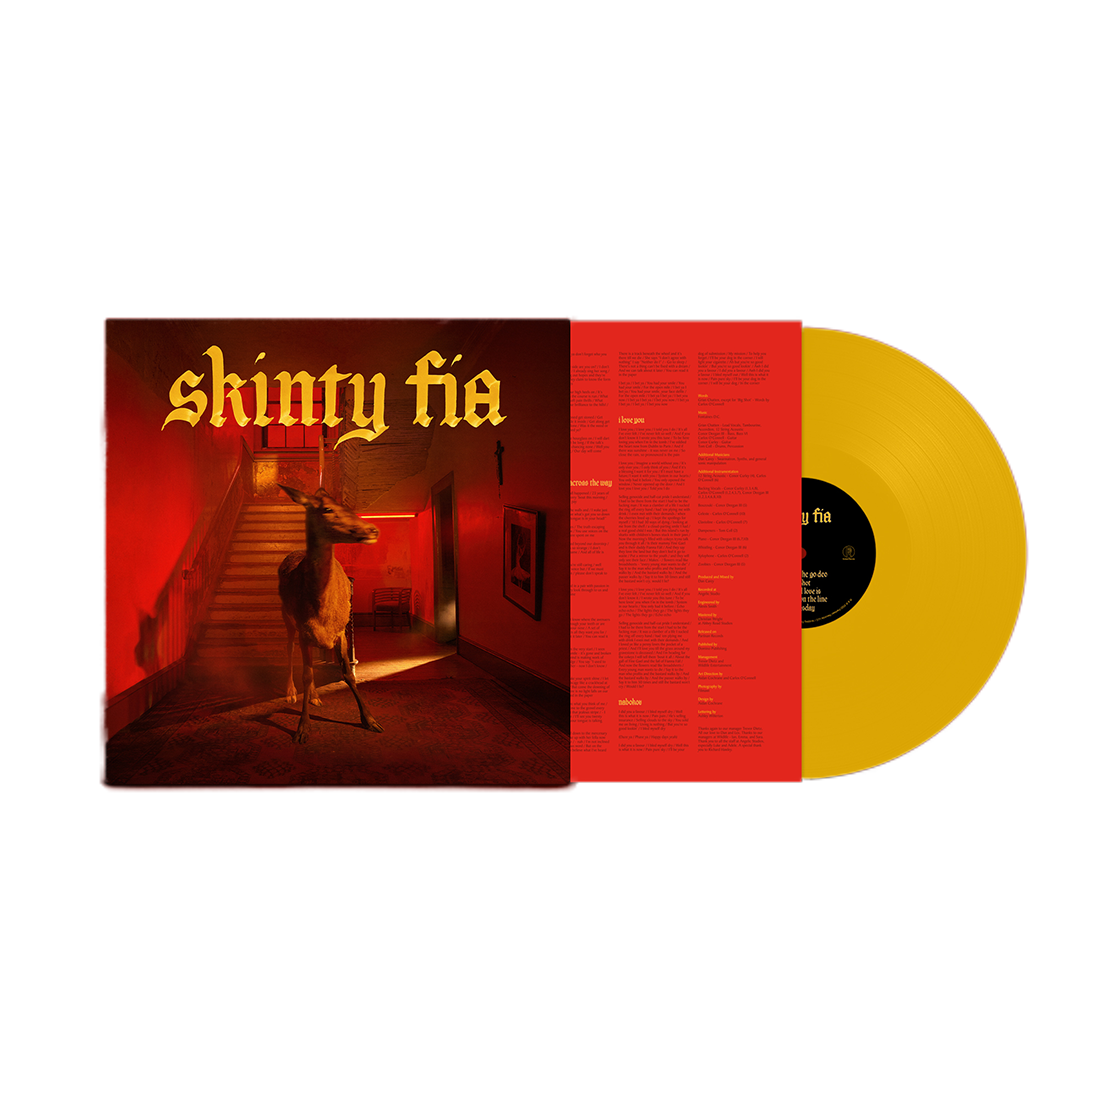 Fontaines D.C. - Skinty Fia: Limited Edition Yellow Vinyl LP